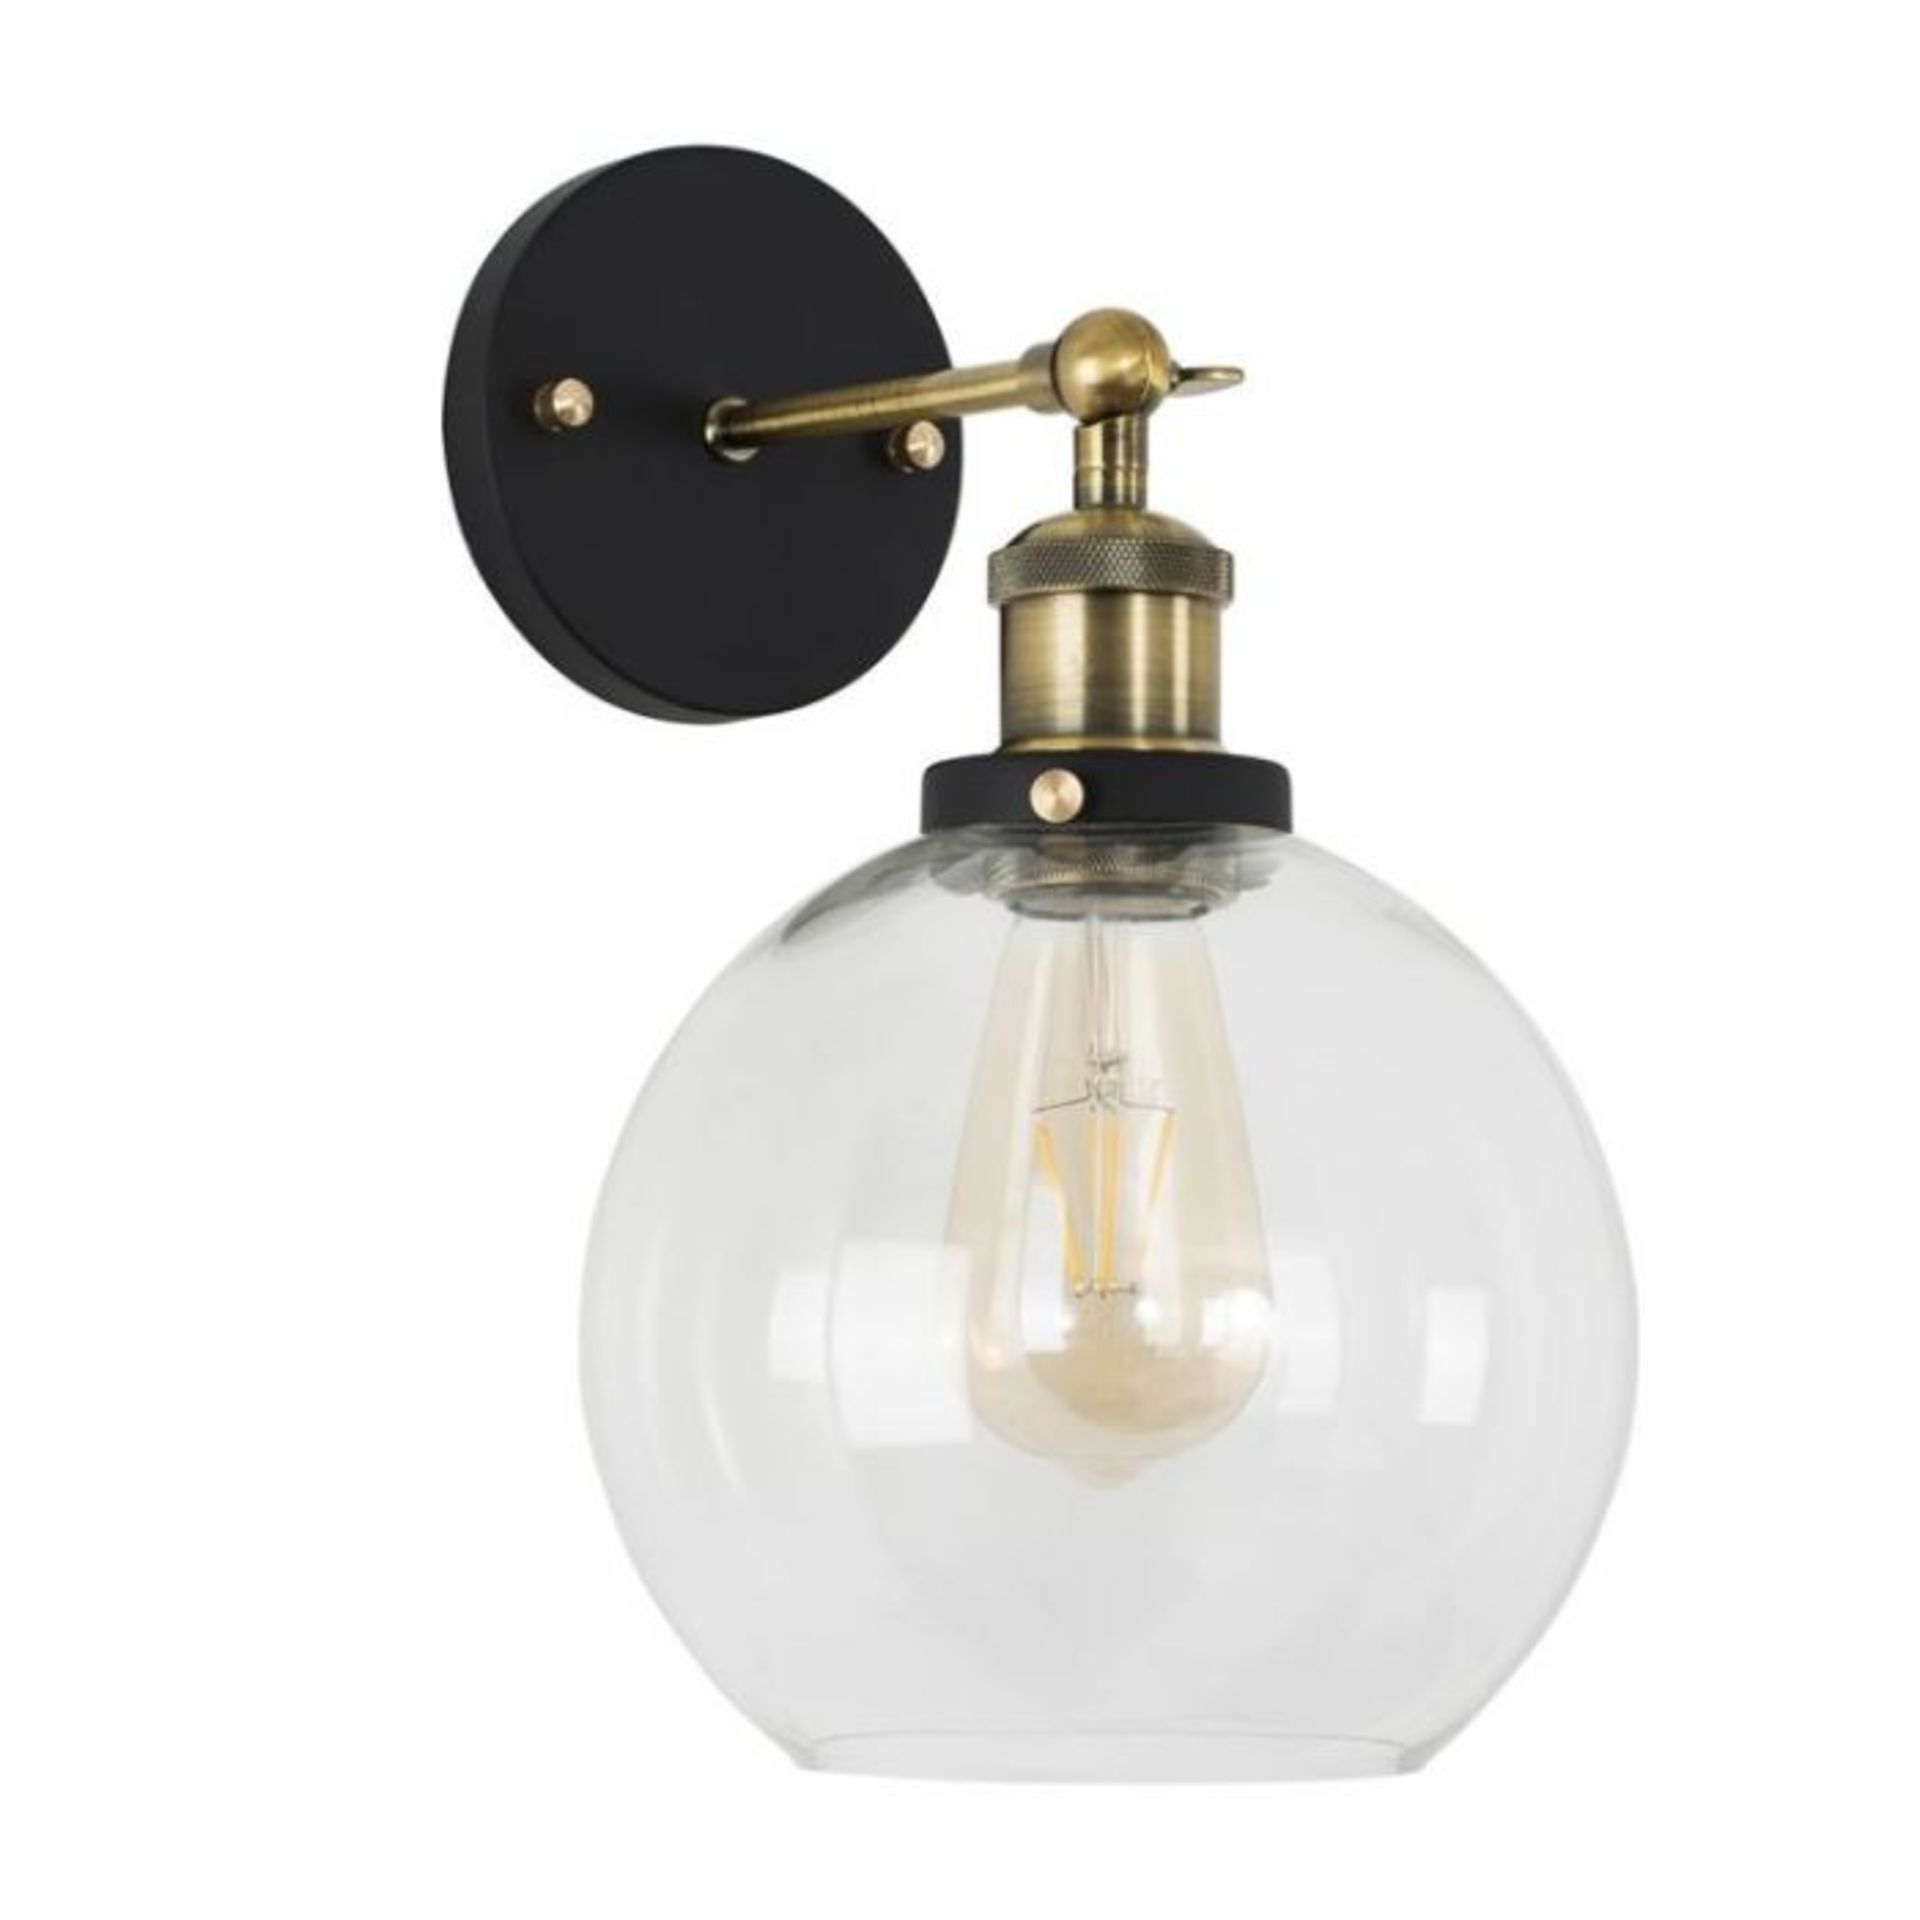 Minisun, Set of 2, Sheridan Steam Punk Wall Light (BLACK WITH ANTIQUE ACCENTS & CLEAR GLASS